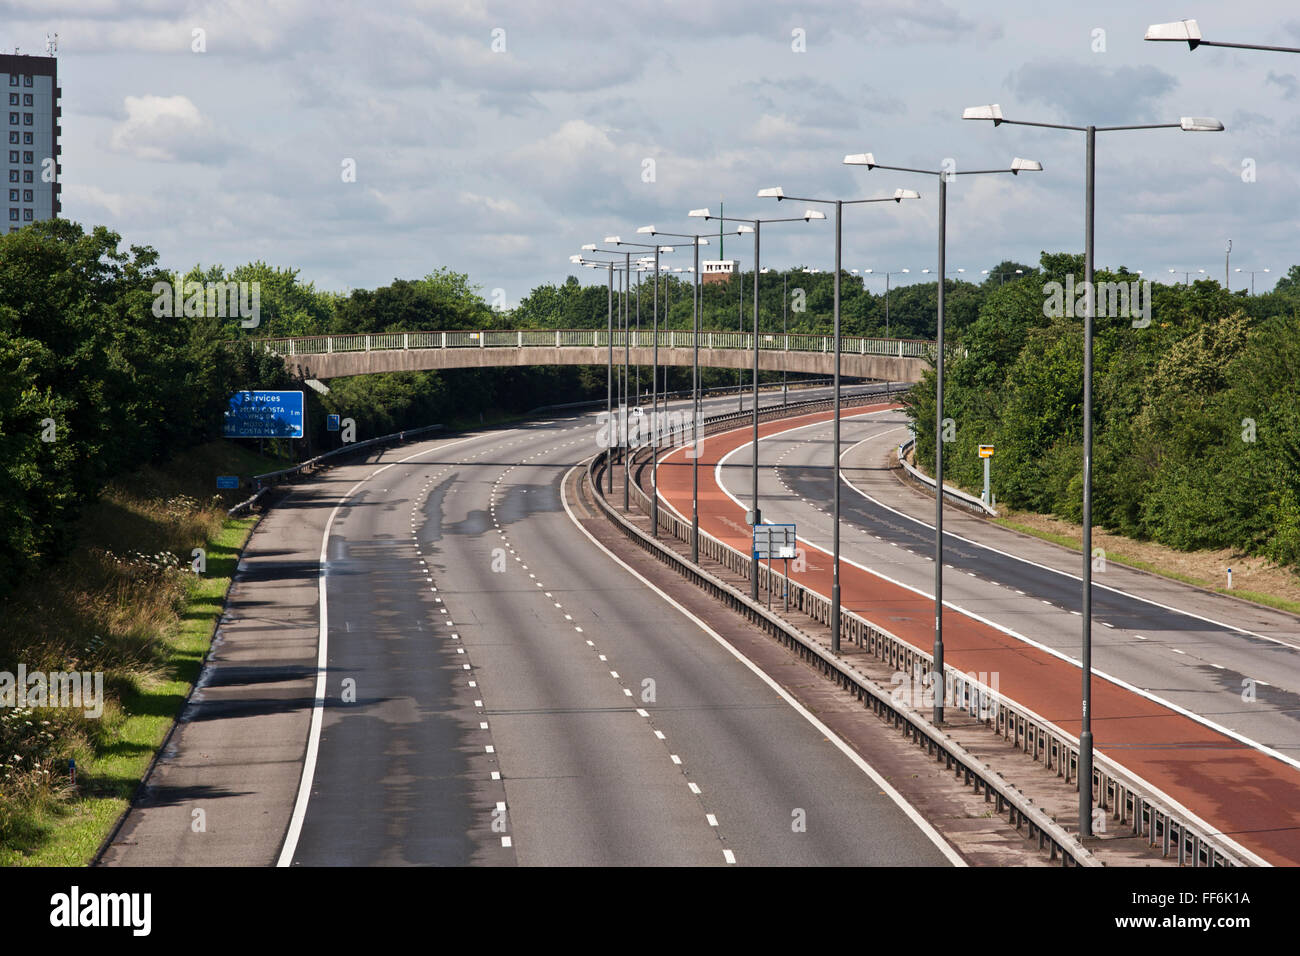 M4 Motorway London High Resolution Stock Photography and Images - Alamy